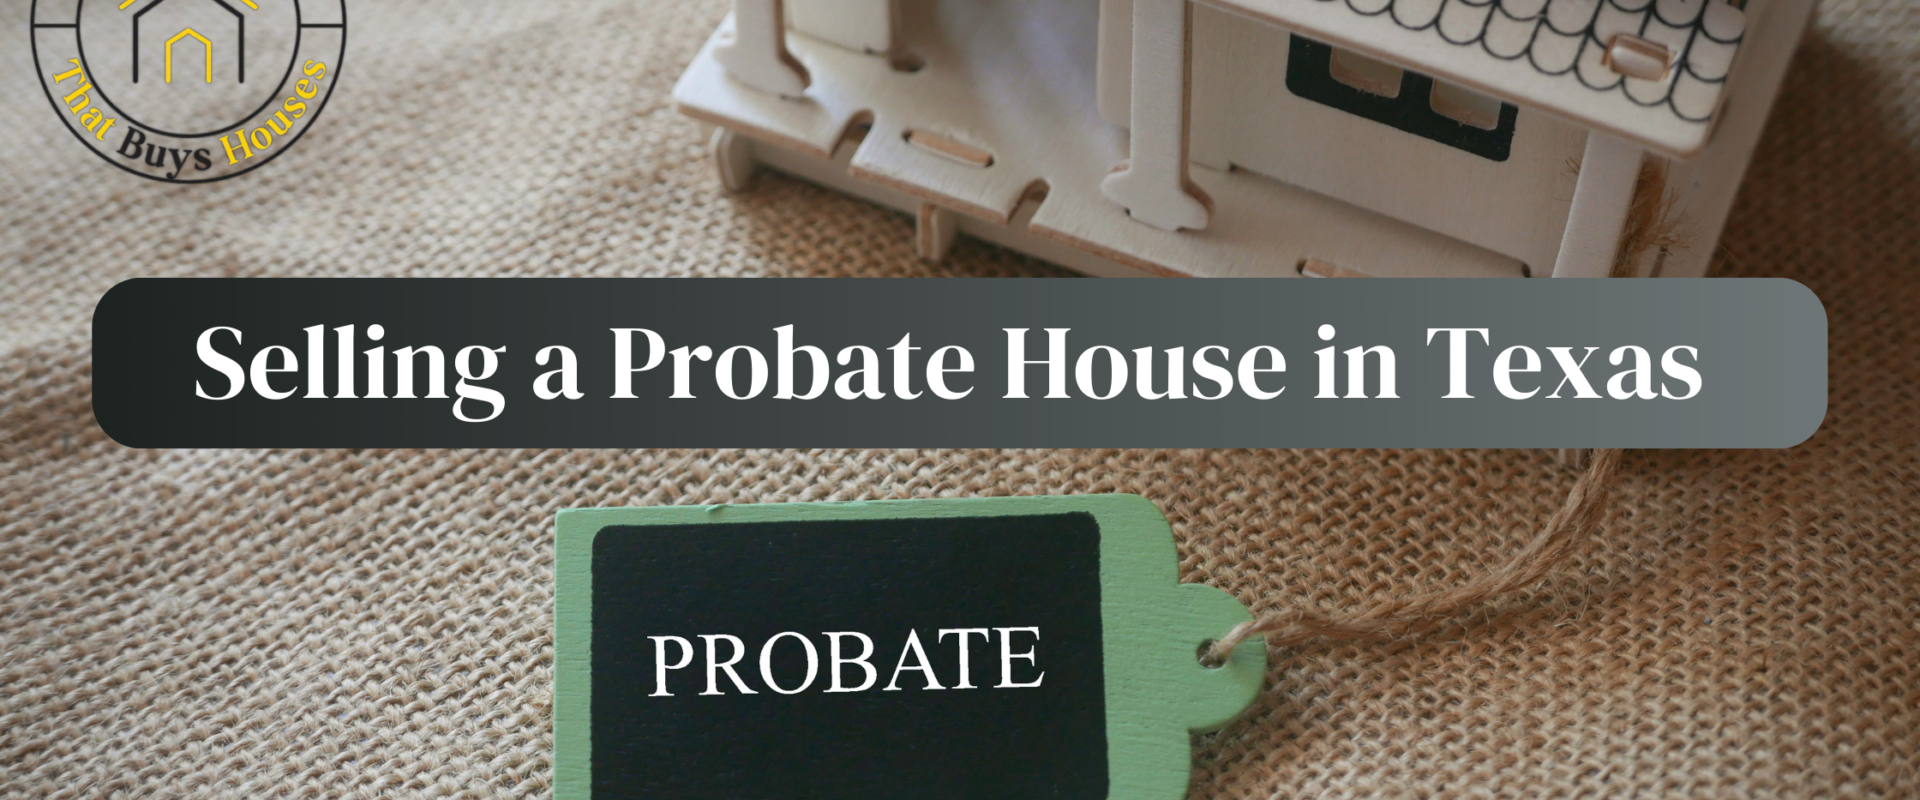 Sell A Probate House in Texas